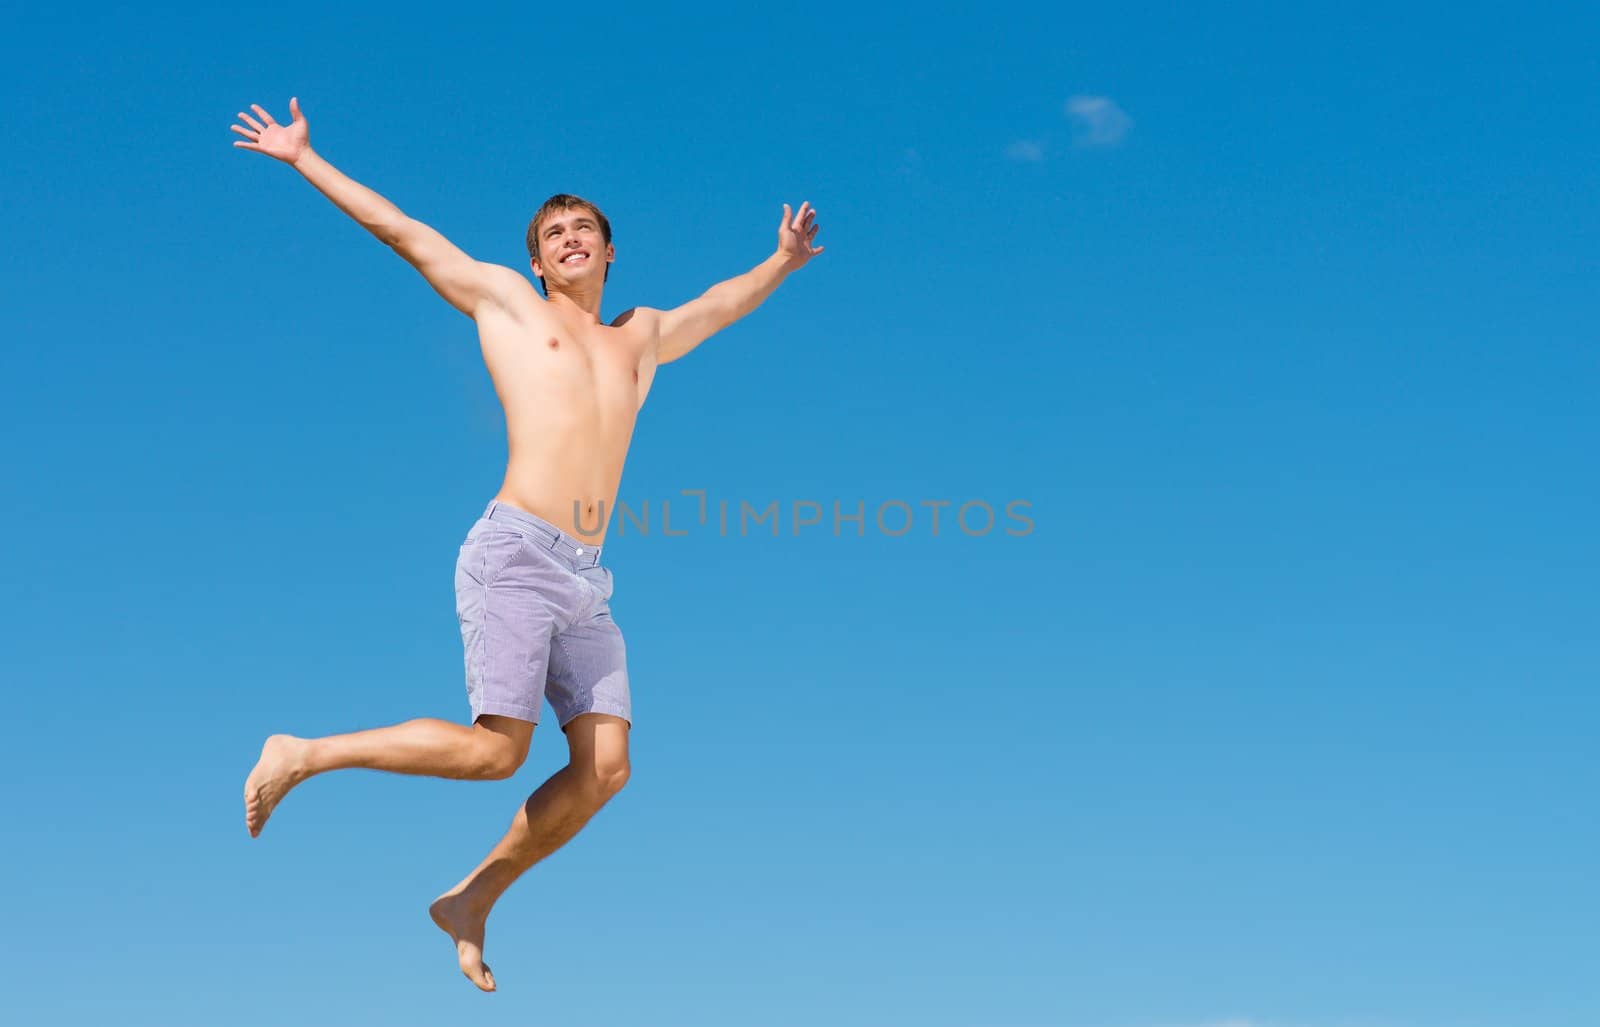 happy young man jumping on a background of blue sky, spreading his hands